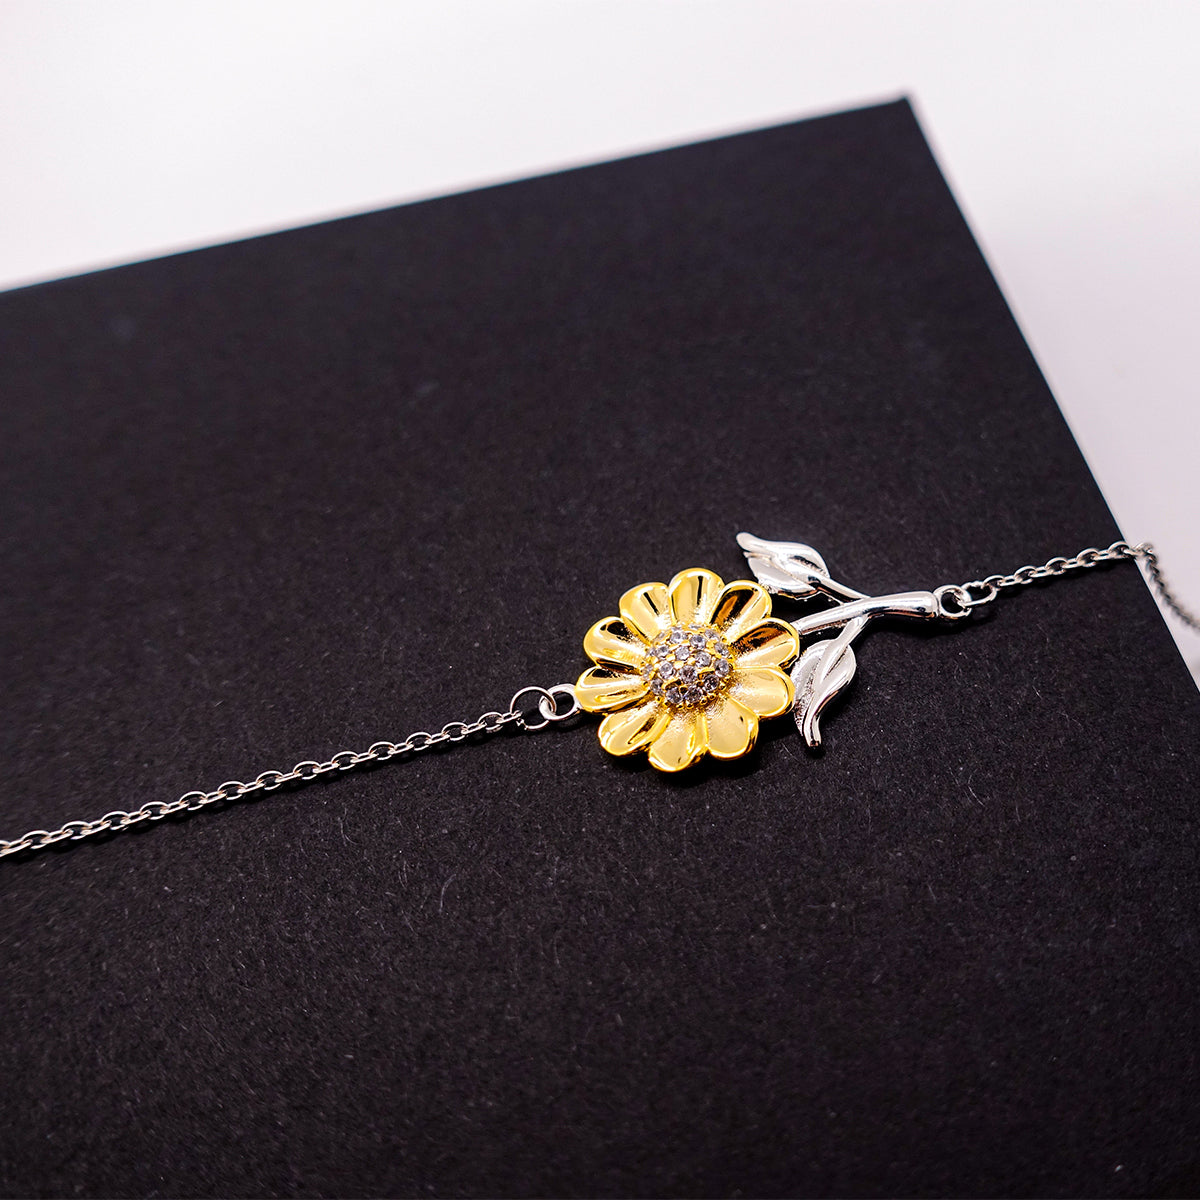 Grandpa Sunflower Bracelet - Always in My Heart, Unique Gift for Veterans Day, Inspirational Jewelry for Grandpa, Birthday Present with Confidence and Hope